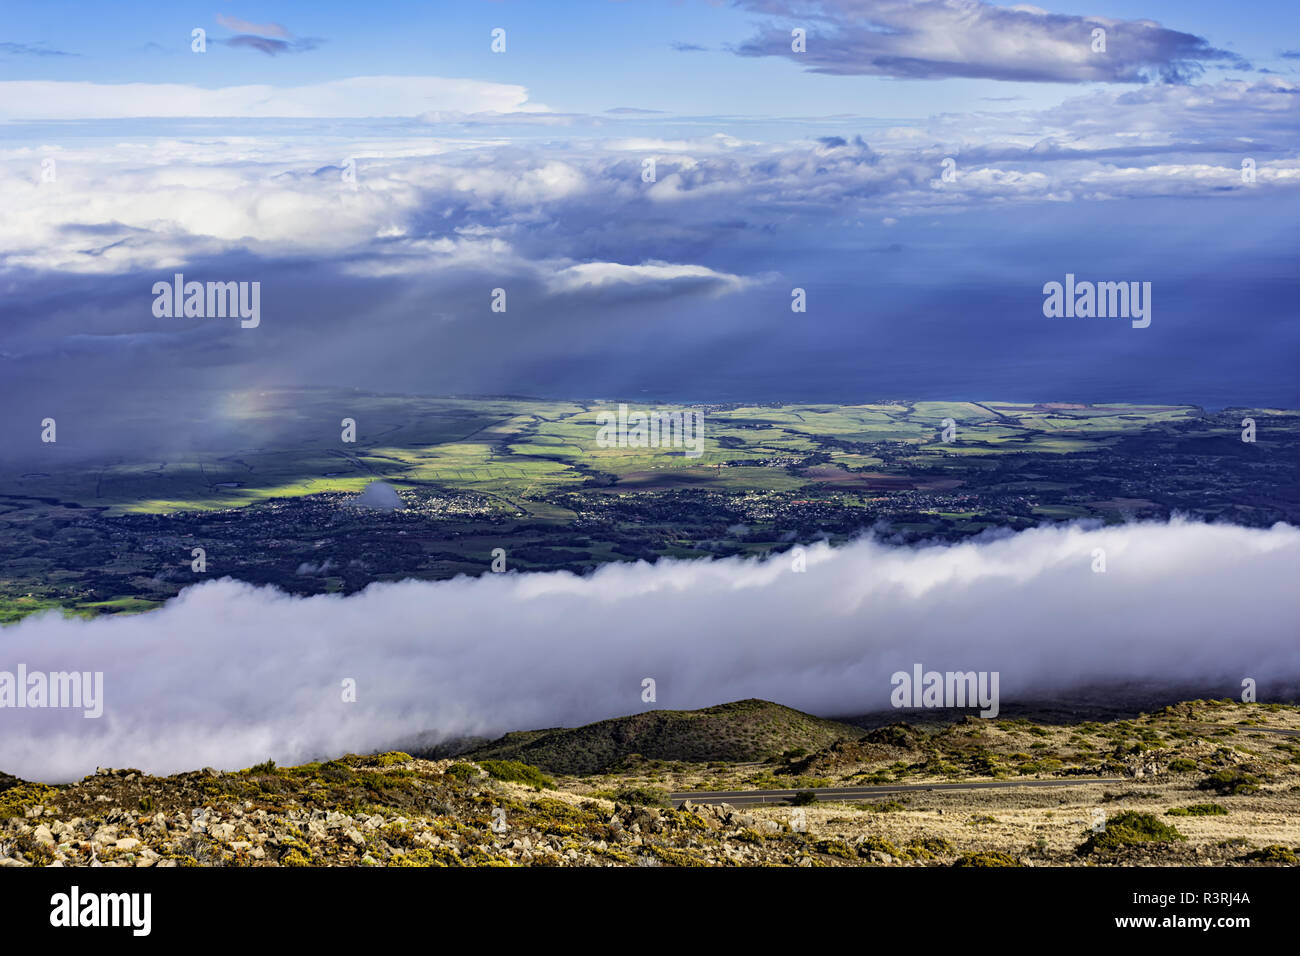 View of upcountry Maui from Haleakala Crater In Haleakala National Park Maui Hawaii USA in the morning Stock Photo